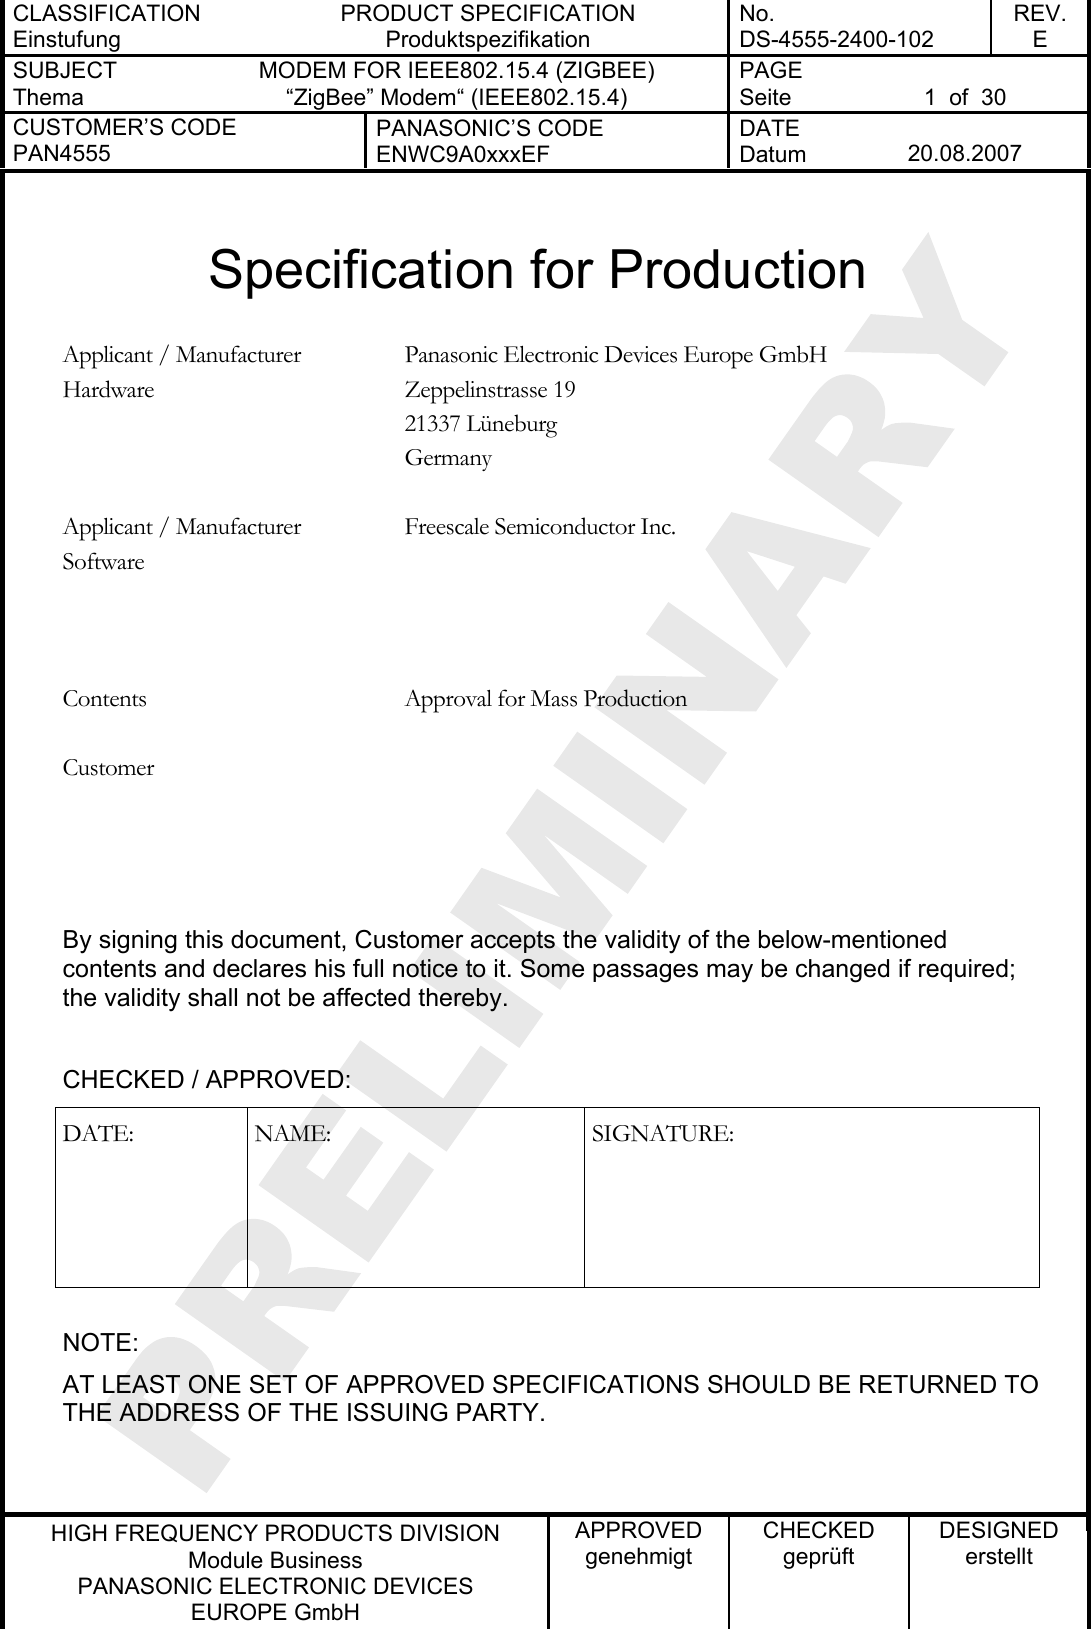 CLASSIFICATION Einstufung PRODUCT SPECIFICATION Produktspezifikation No. DS-4555-2400-102 REV. E SUBJECT Thema MODEM FOR IEEE802.15.4 (ZIGBEE) “ZigBee” Modem“ (IEEE802.15.4) PAGE Seite  1  of  30 CUSTOMER’S CODE PAN4555 PANASONIC’S CODE ENWC9A0xxxEF DATE Datum  20.08.2007   HIGH FREQUENCY PRODUCTS DIVISION Module Business PANASONIC ELECTRONIC DEVICES  EUROPE GmbH APPROVED genehmigt CHECKED geprüft DESIGNED erstellt  Specification for Production  Panasonic Electronic Devices Europe GmbH Zeppelinstrasse 19 21337 Lüneburg Applicant / Manufacturer Hardware Germany   Freescale Semiconductor Inc.   Applicant / Manufacturer Software    Contents  Approval for Mass Production      Customer    By signing this document, Customer accepts the validity of the below-mentioned contents and declares his full notice to it. Some passages may be changed if required; the validity shall not be affected thereby.  CHECKED / APPROVED: DATE: NAME:  SIGNATURE:  NOTE: AT LEAST ONE SET OF APPROVED SPECIFICATIONS SHOULD BE RETURNED TO THE ADDRESS OF THE ISSUING PARTY.  